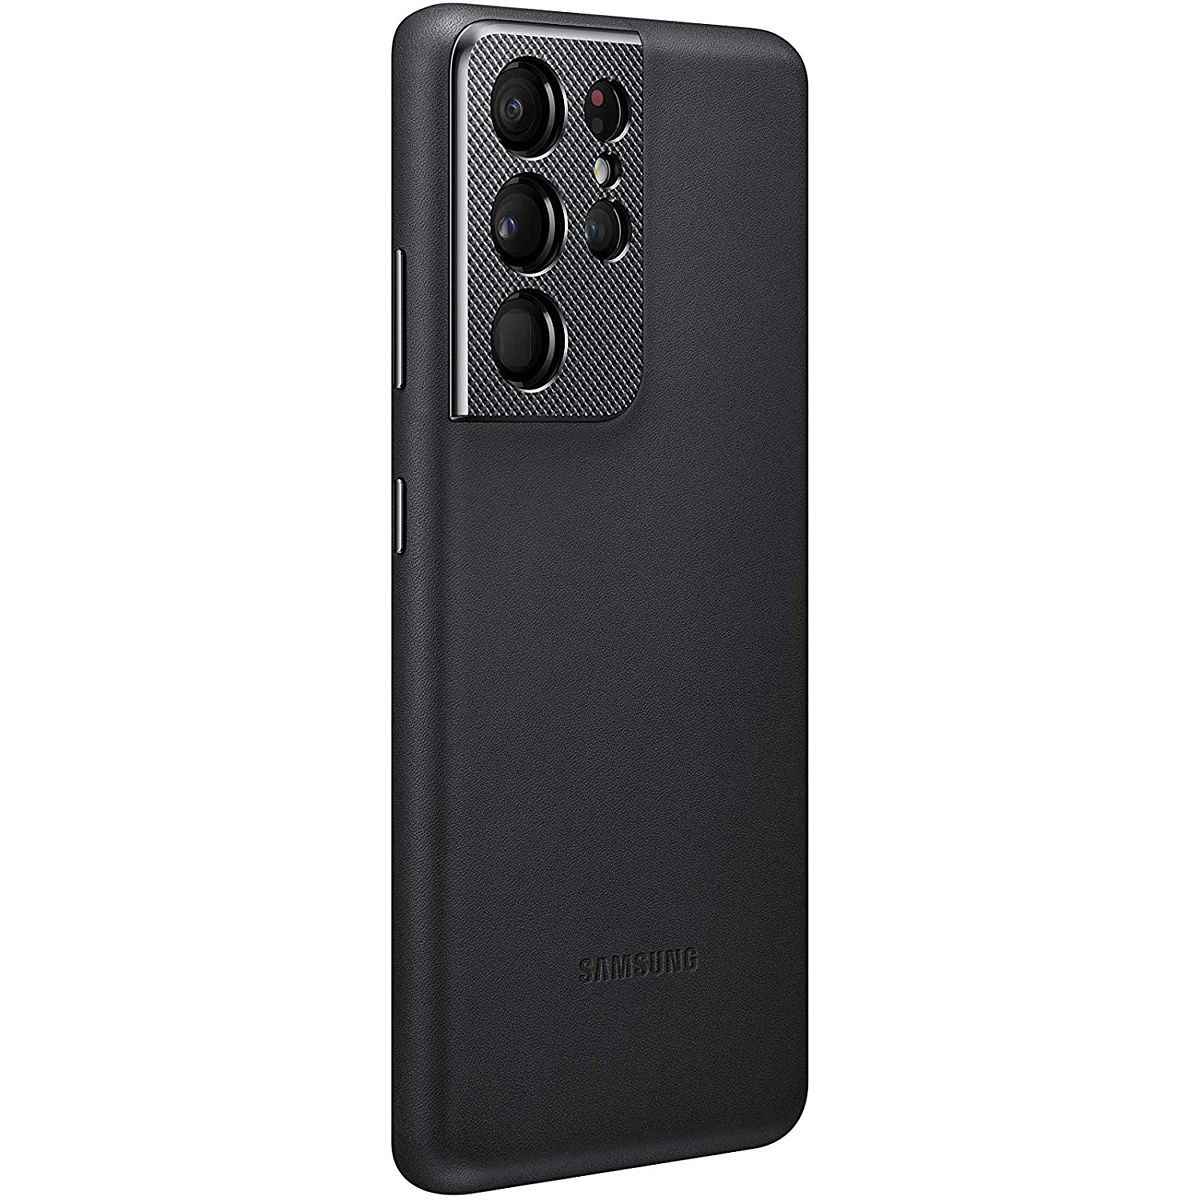 If you have Samsung's biggest S21, this black leather cover is now $42.50, down from the usual price of $50.